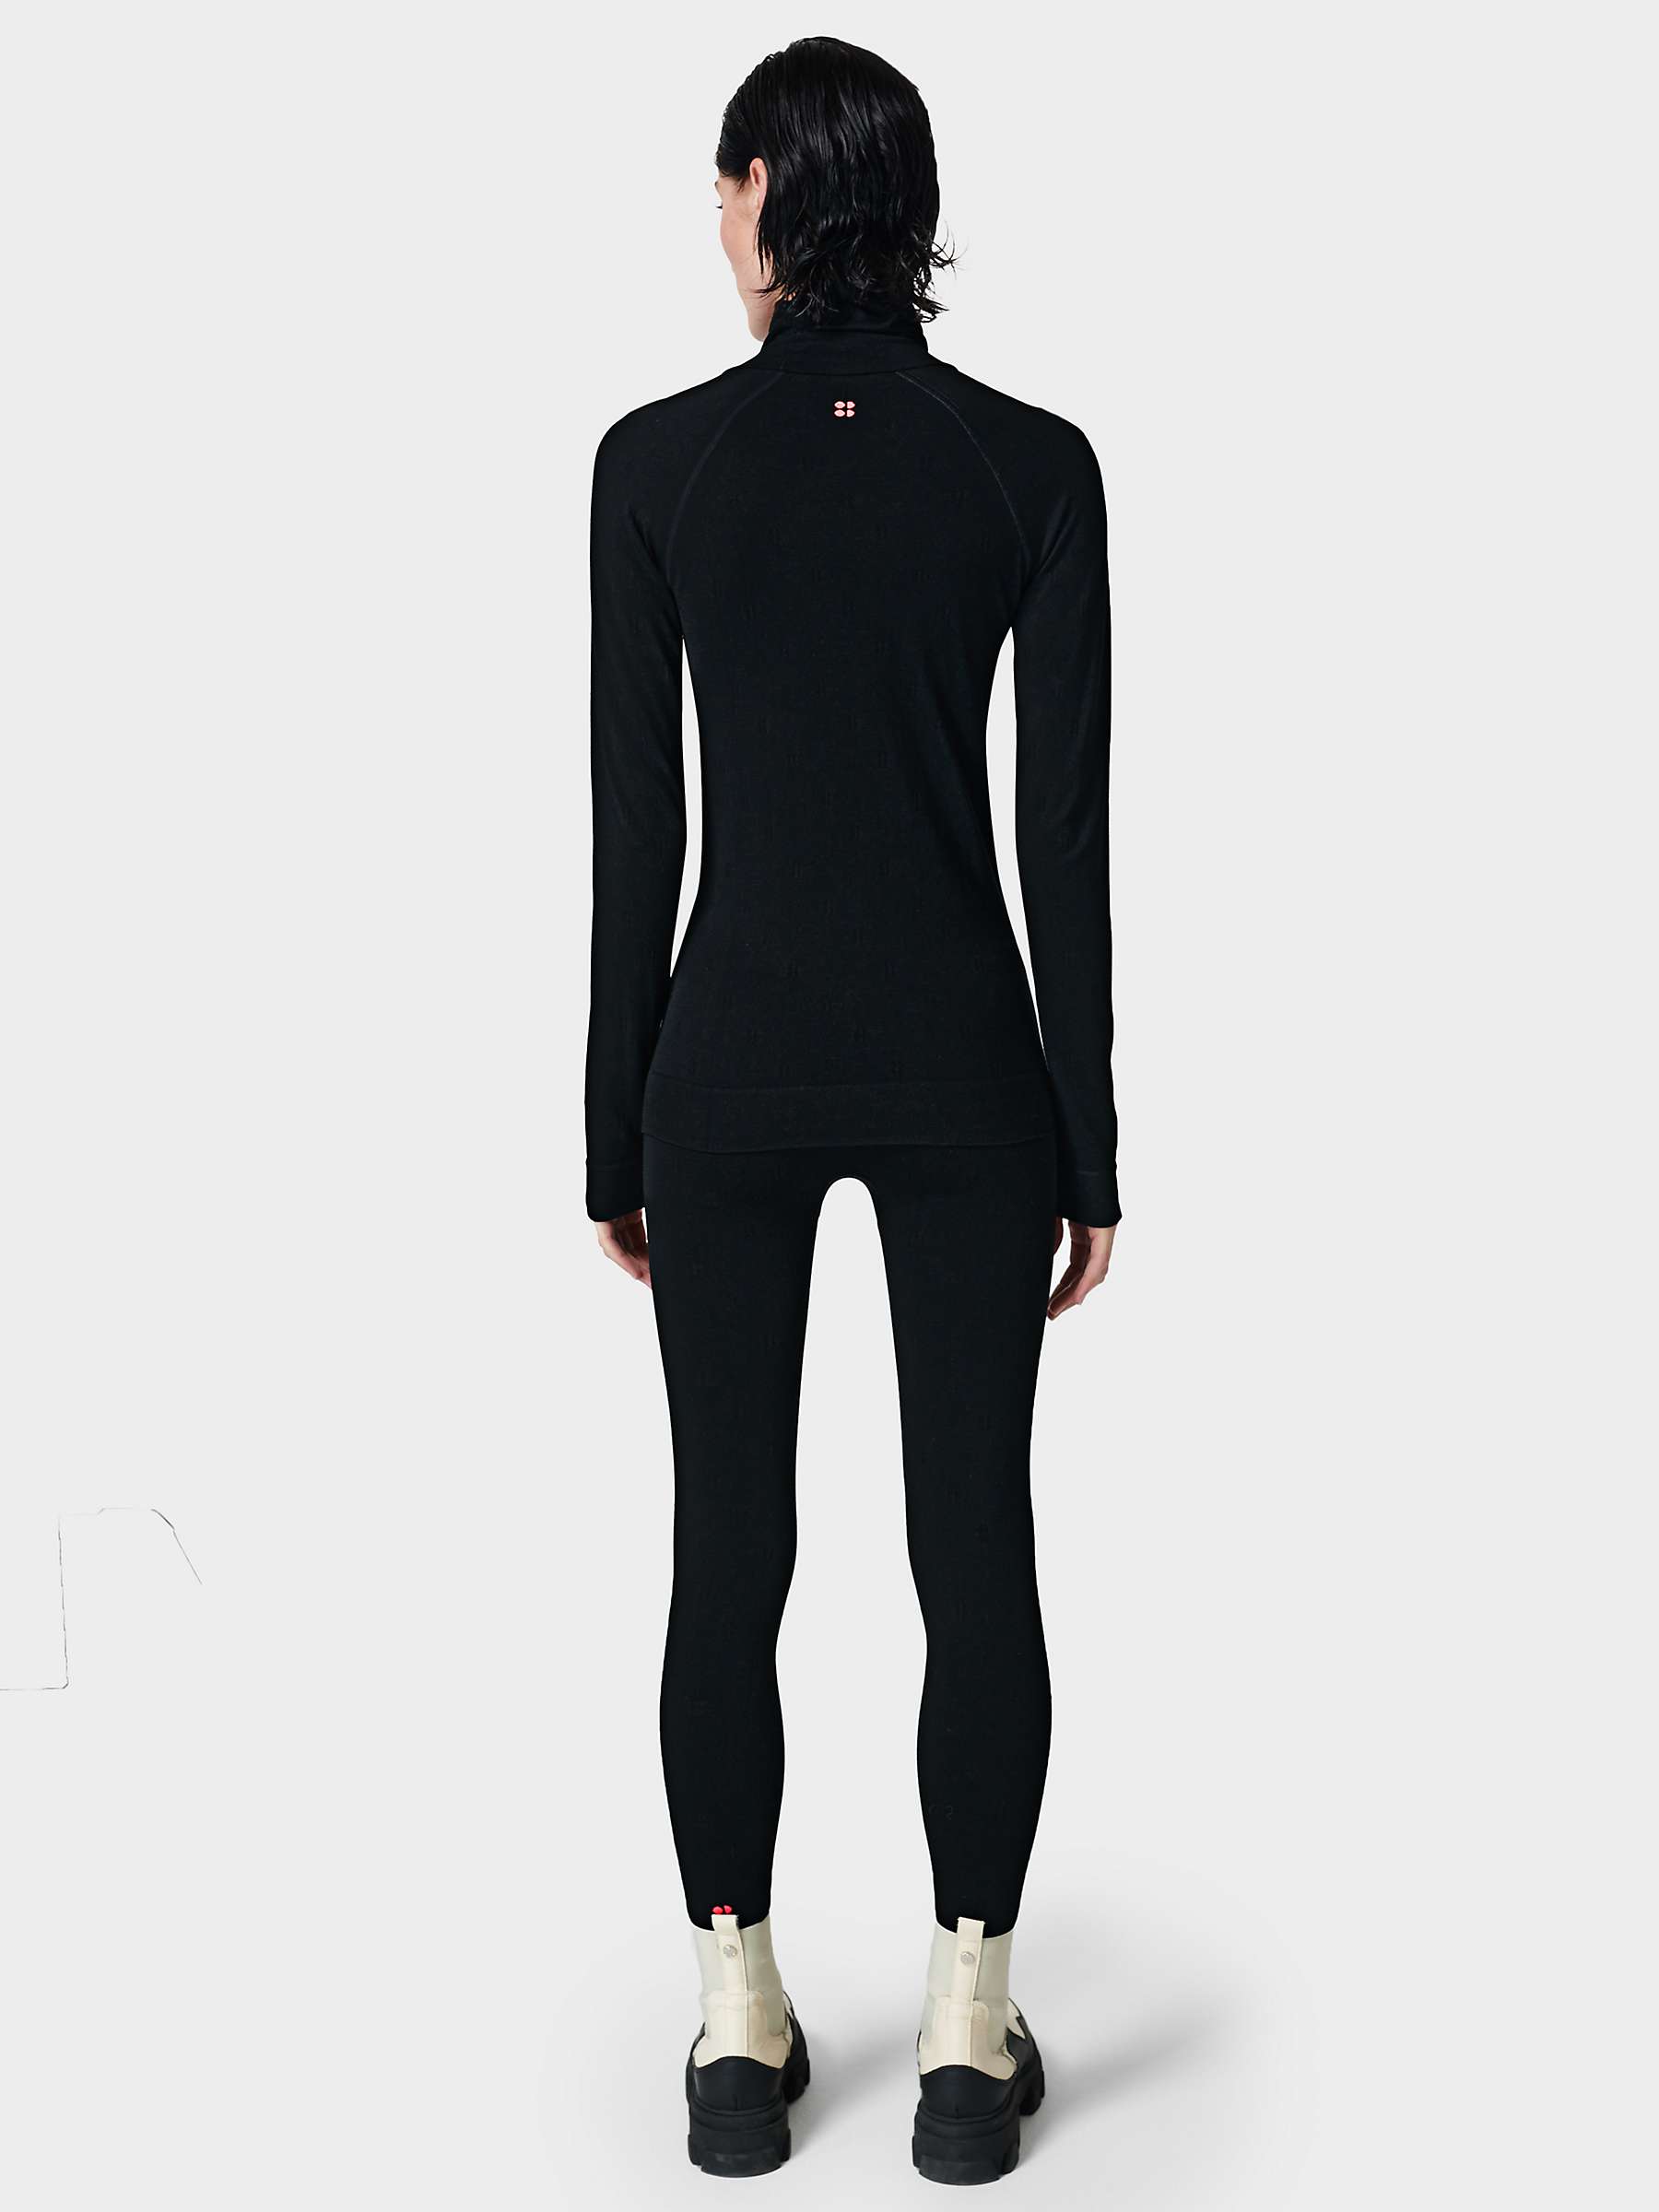 Buy Sweaty Betty Funnel Neck Base Layer Top, Black Online at johnlewis.com